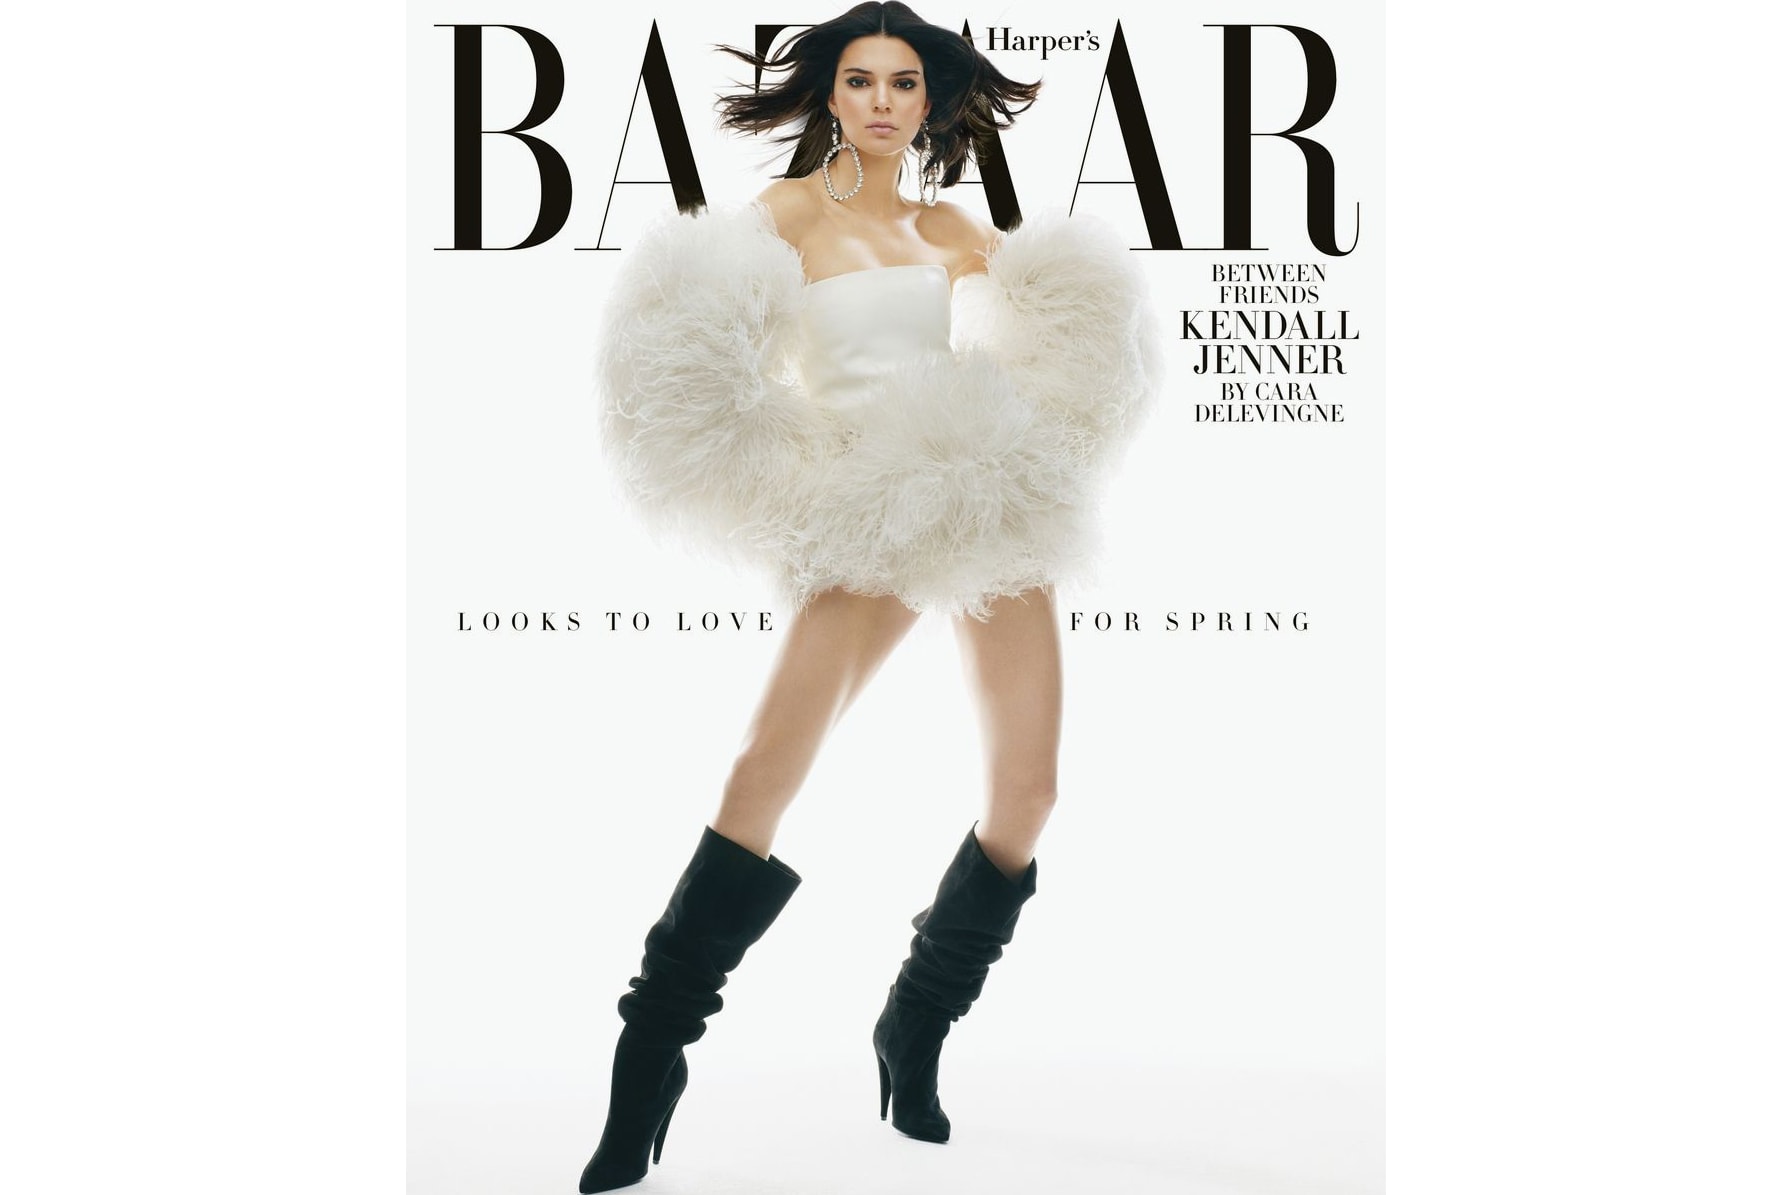 Kendall Jenner Interview Cara Delevingne Harpers Bazaar February 2018 Issue Cover Editorial Supermodel Model